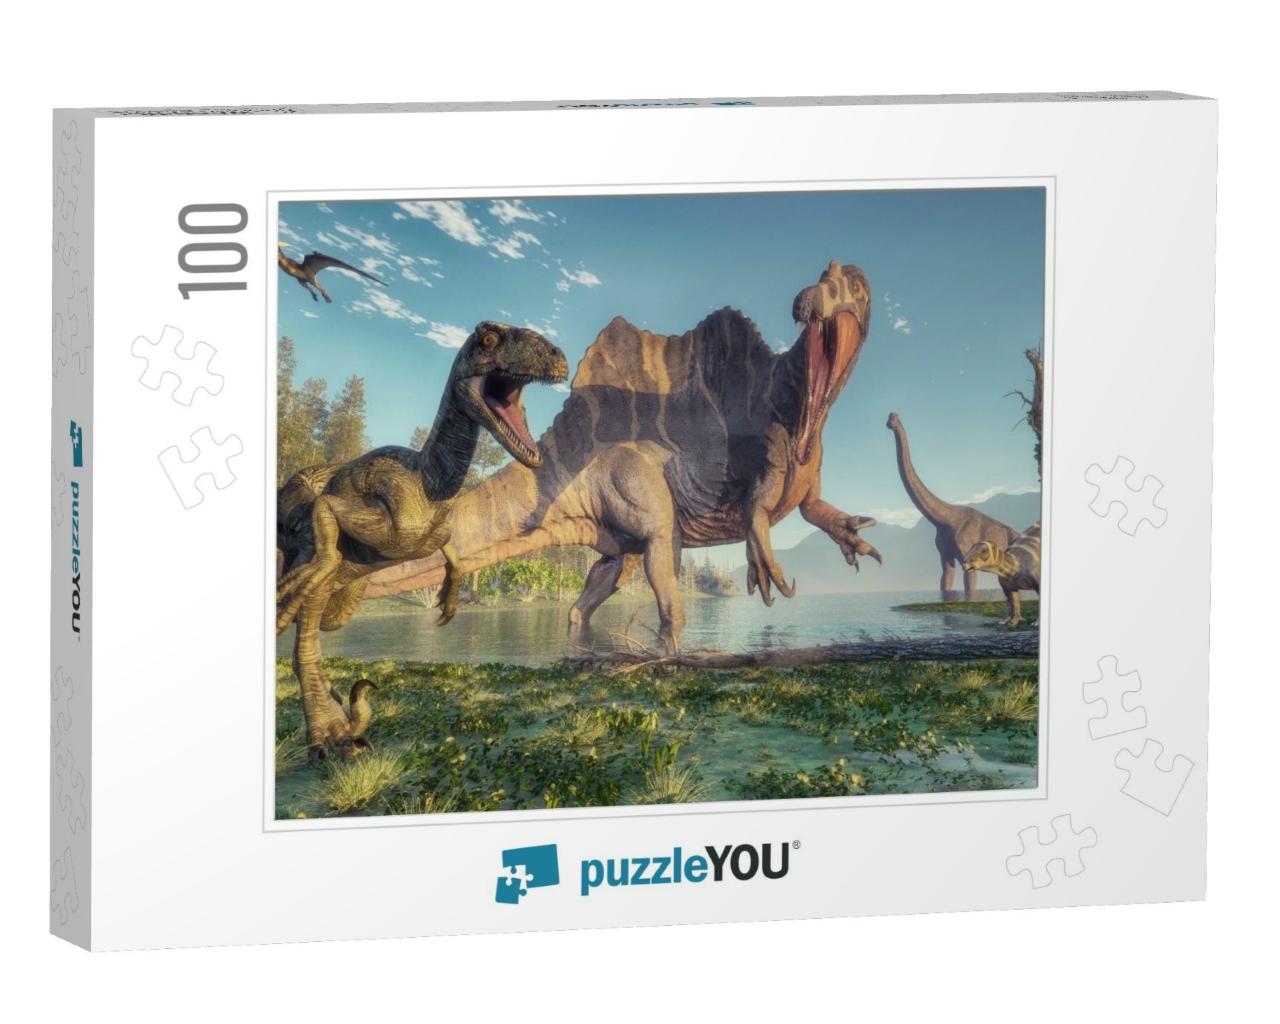 Spinosaurus & Deinonychus in the Jungle. This is a 3D Ren... Jigsaw Puzzle with 100 pieces